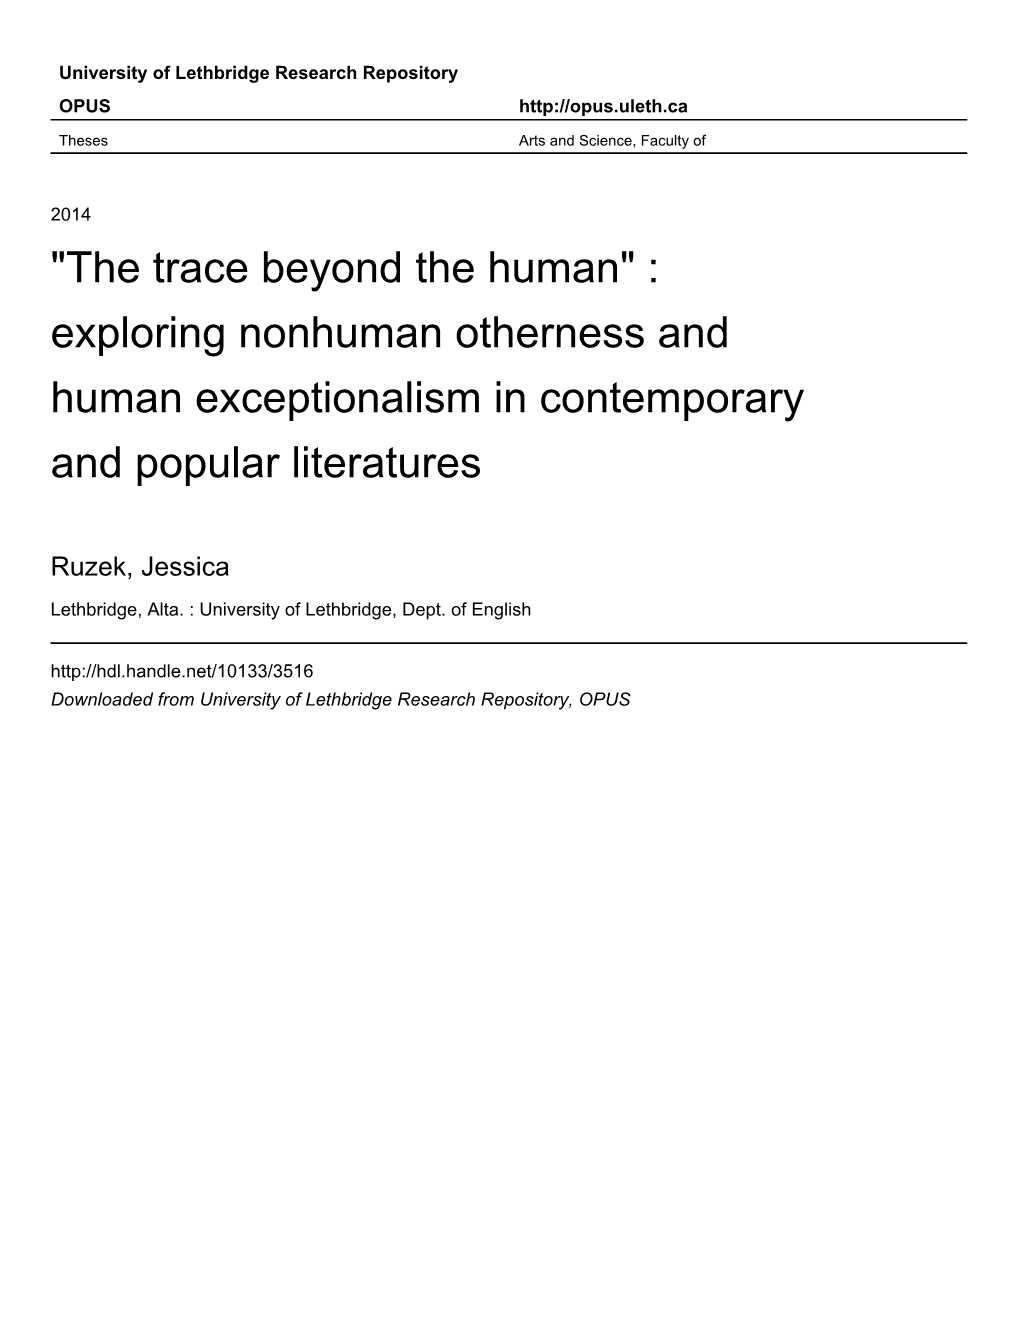 Exploring Nonhuman Otherness and Human Exceptionalism in Contemporary and Popular Literatures